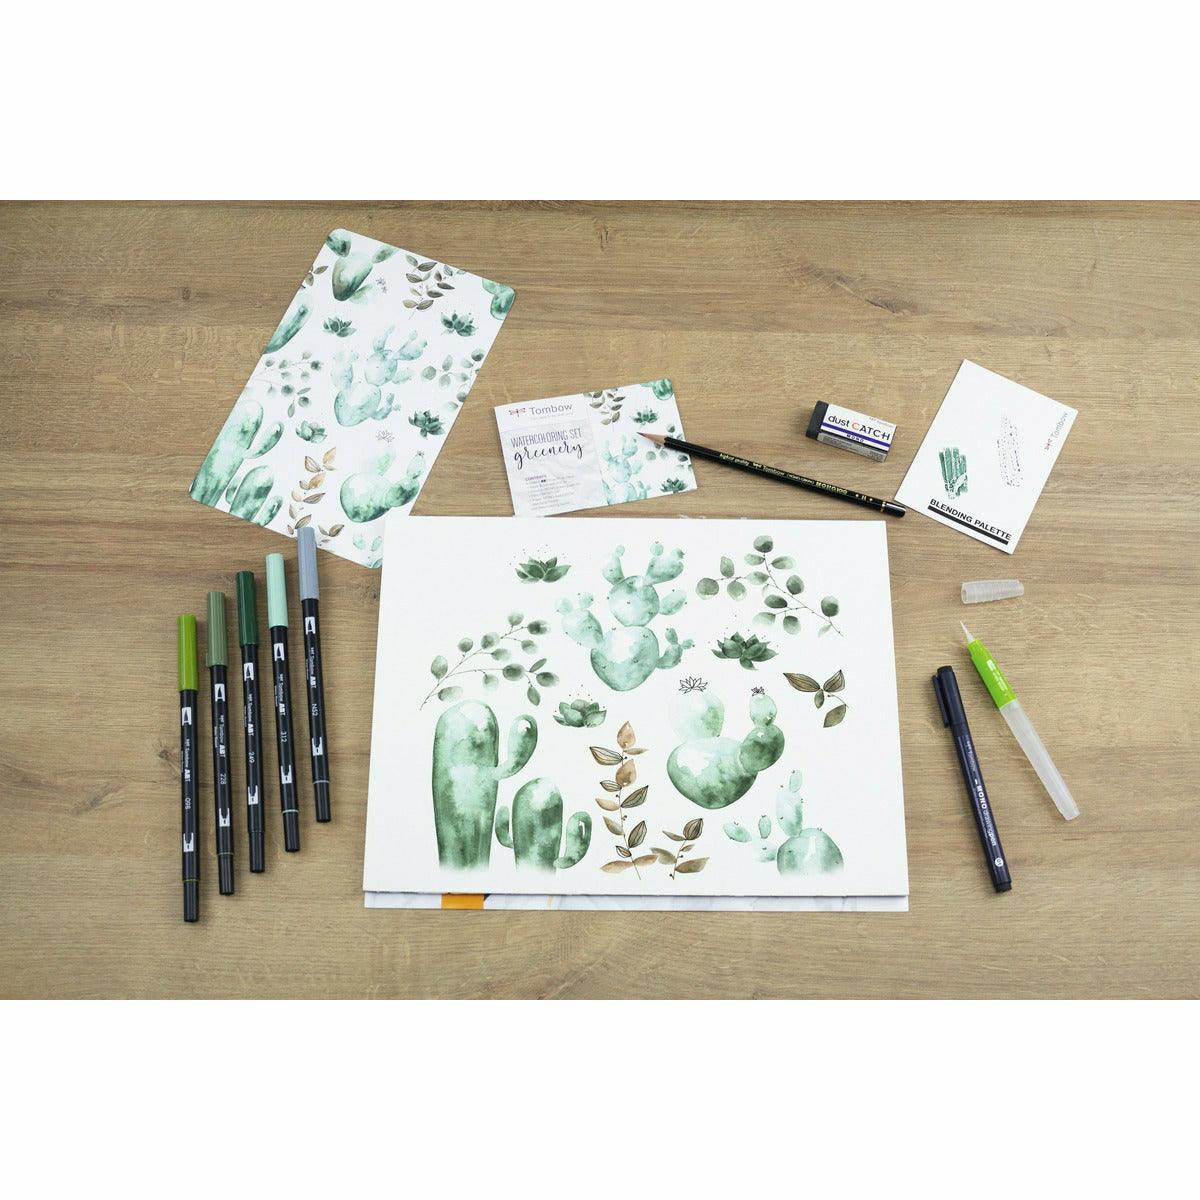 Watercolor Set Greenery im Outlet Sale